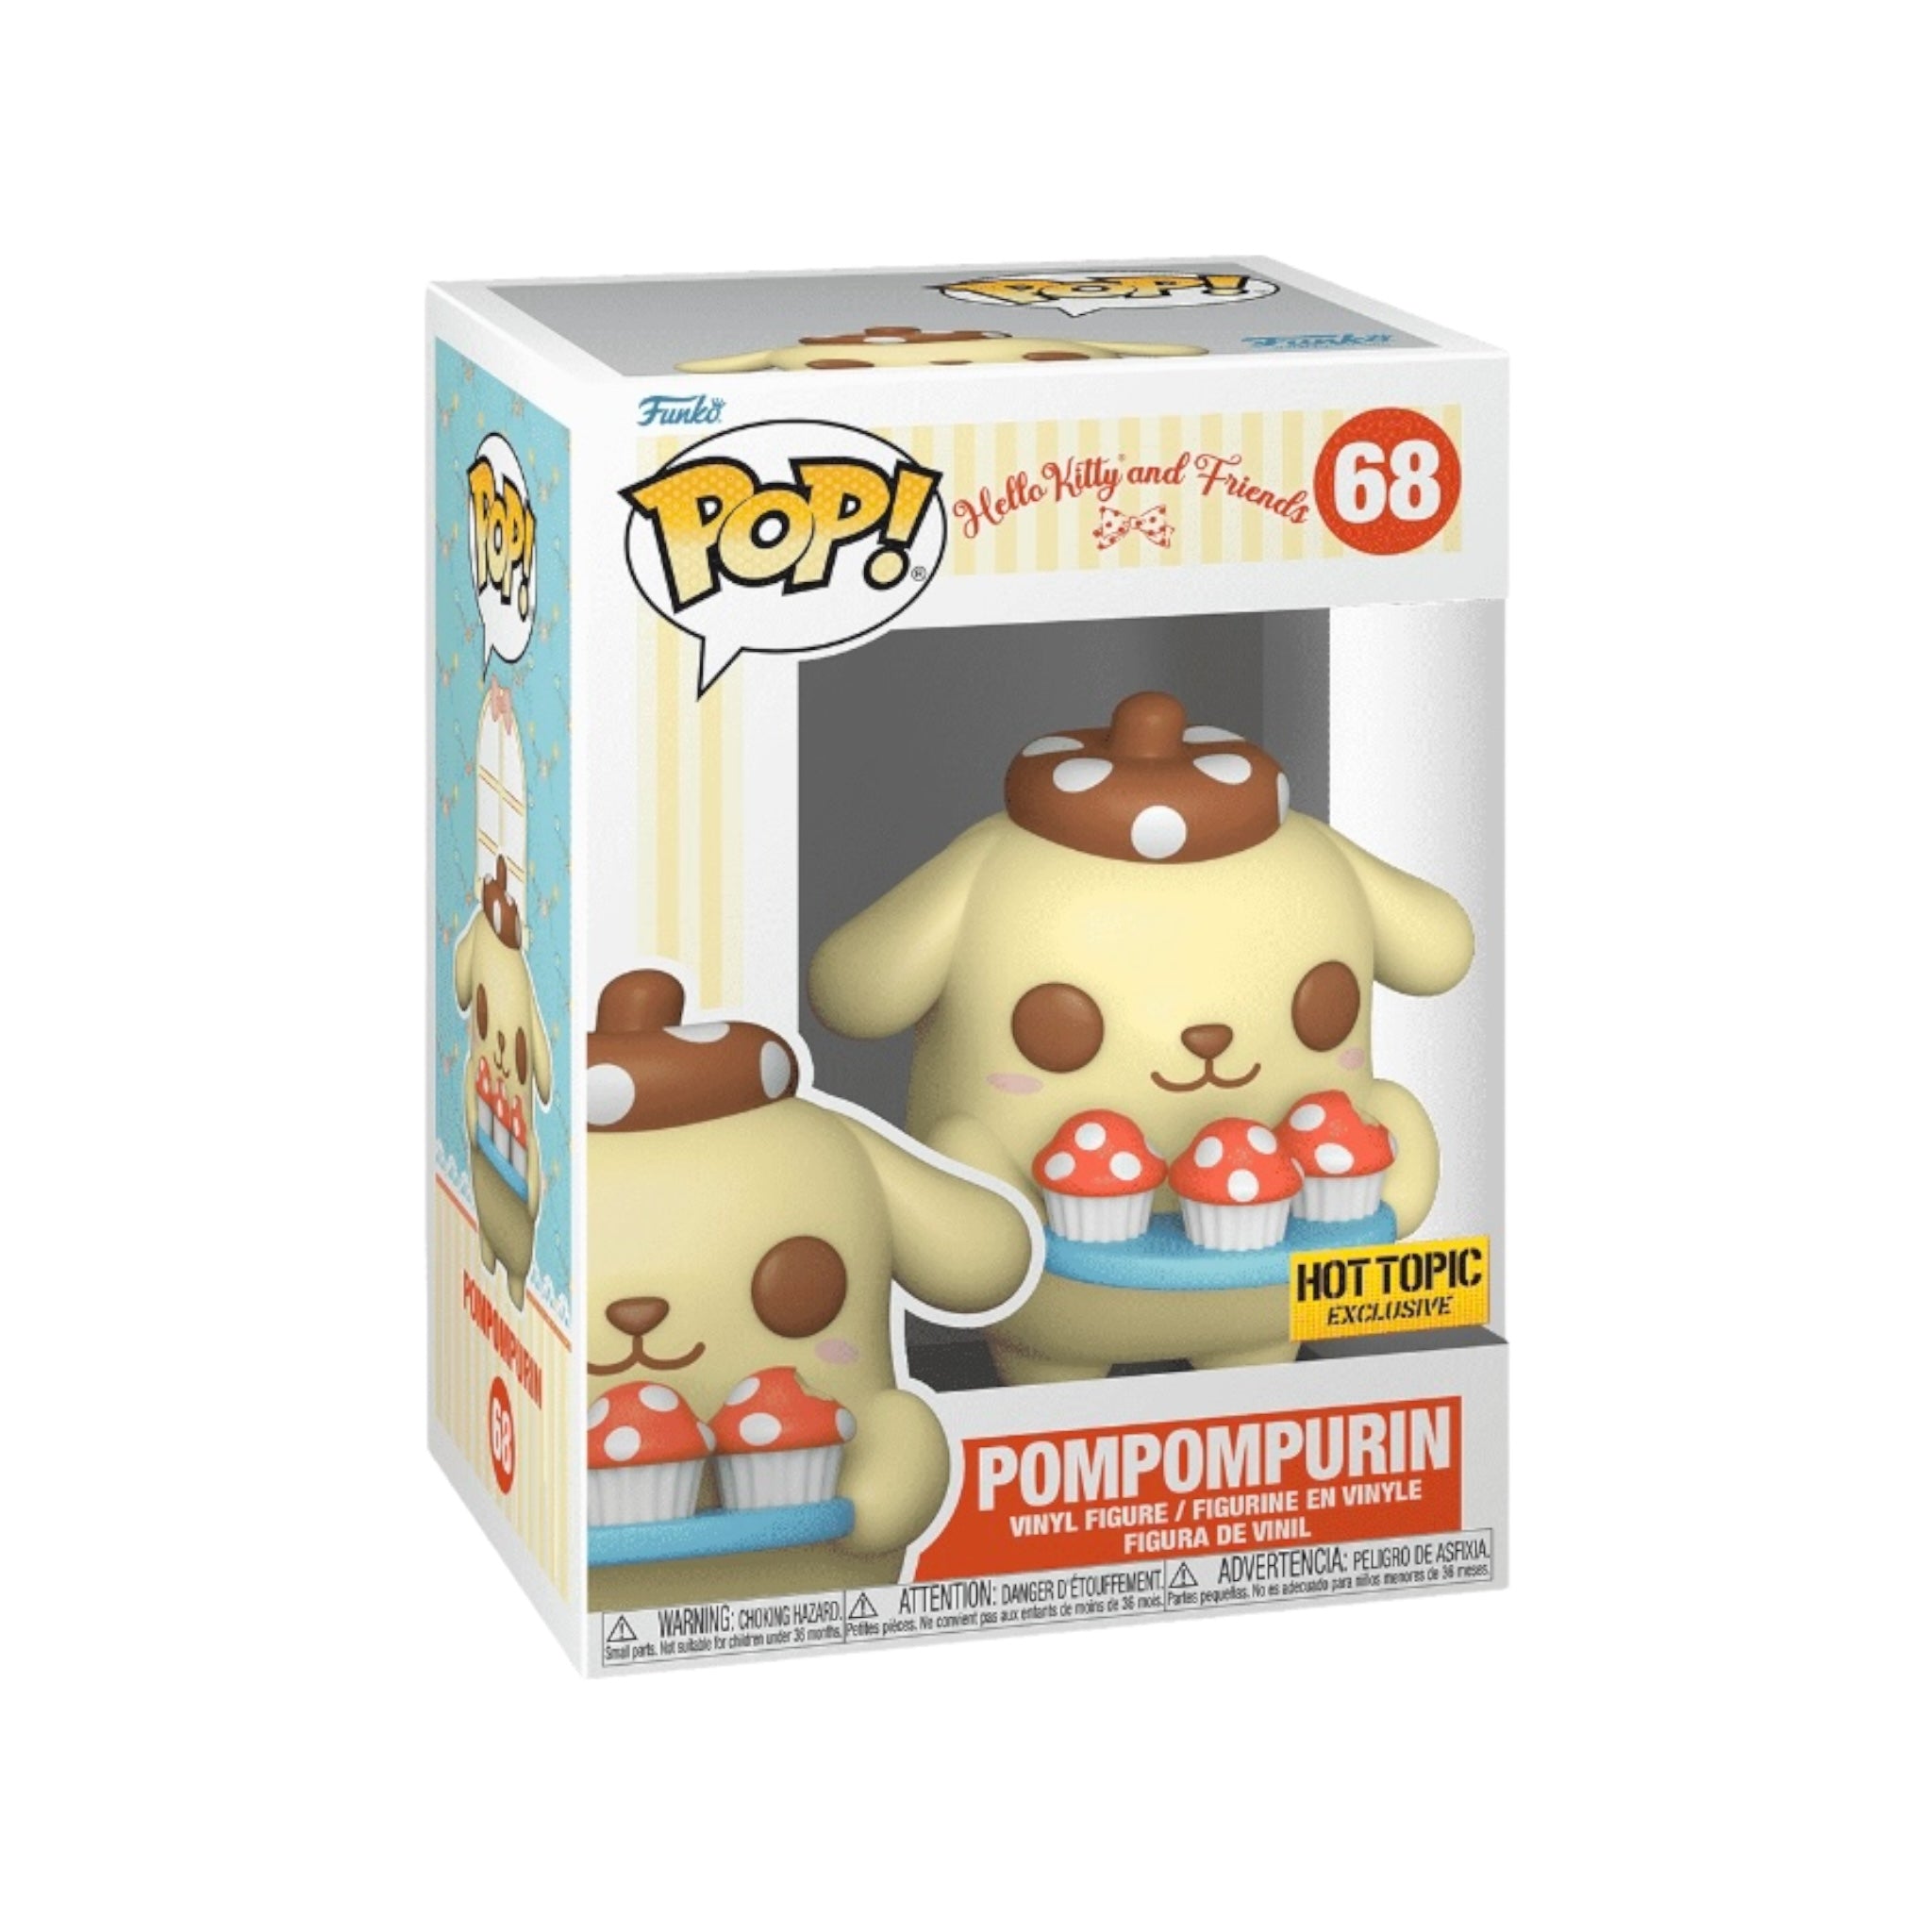 Pompompurin #68 Funko Pop! - Hello Kitty and Friends - Hot Topic Exclusive